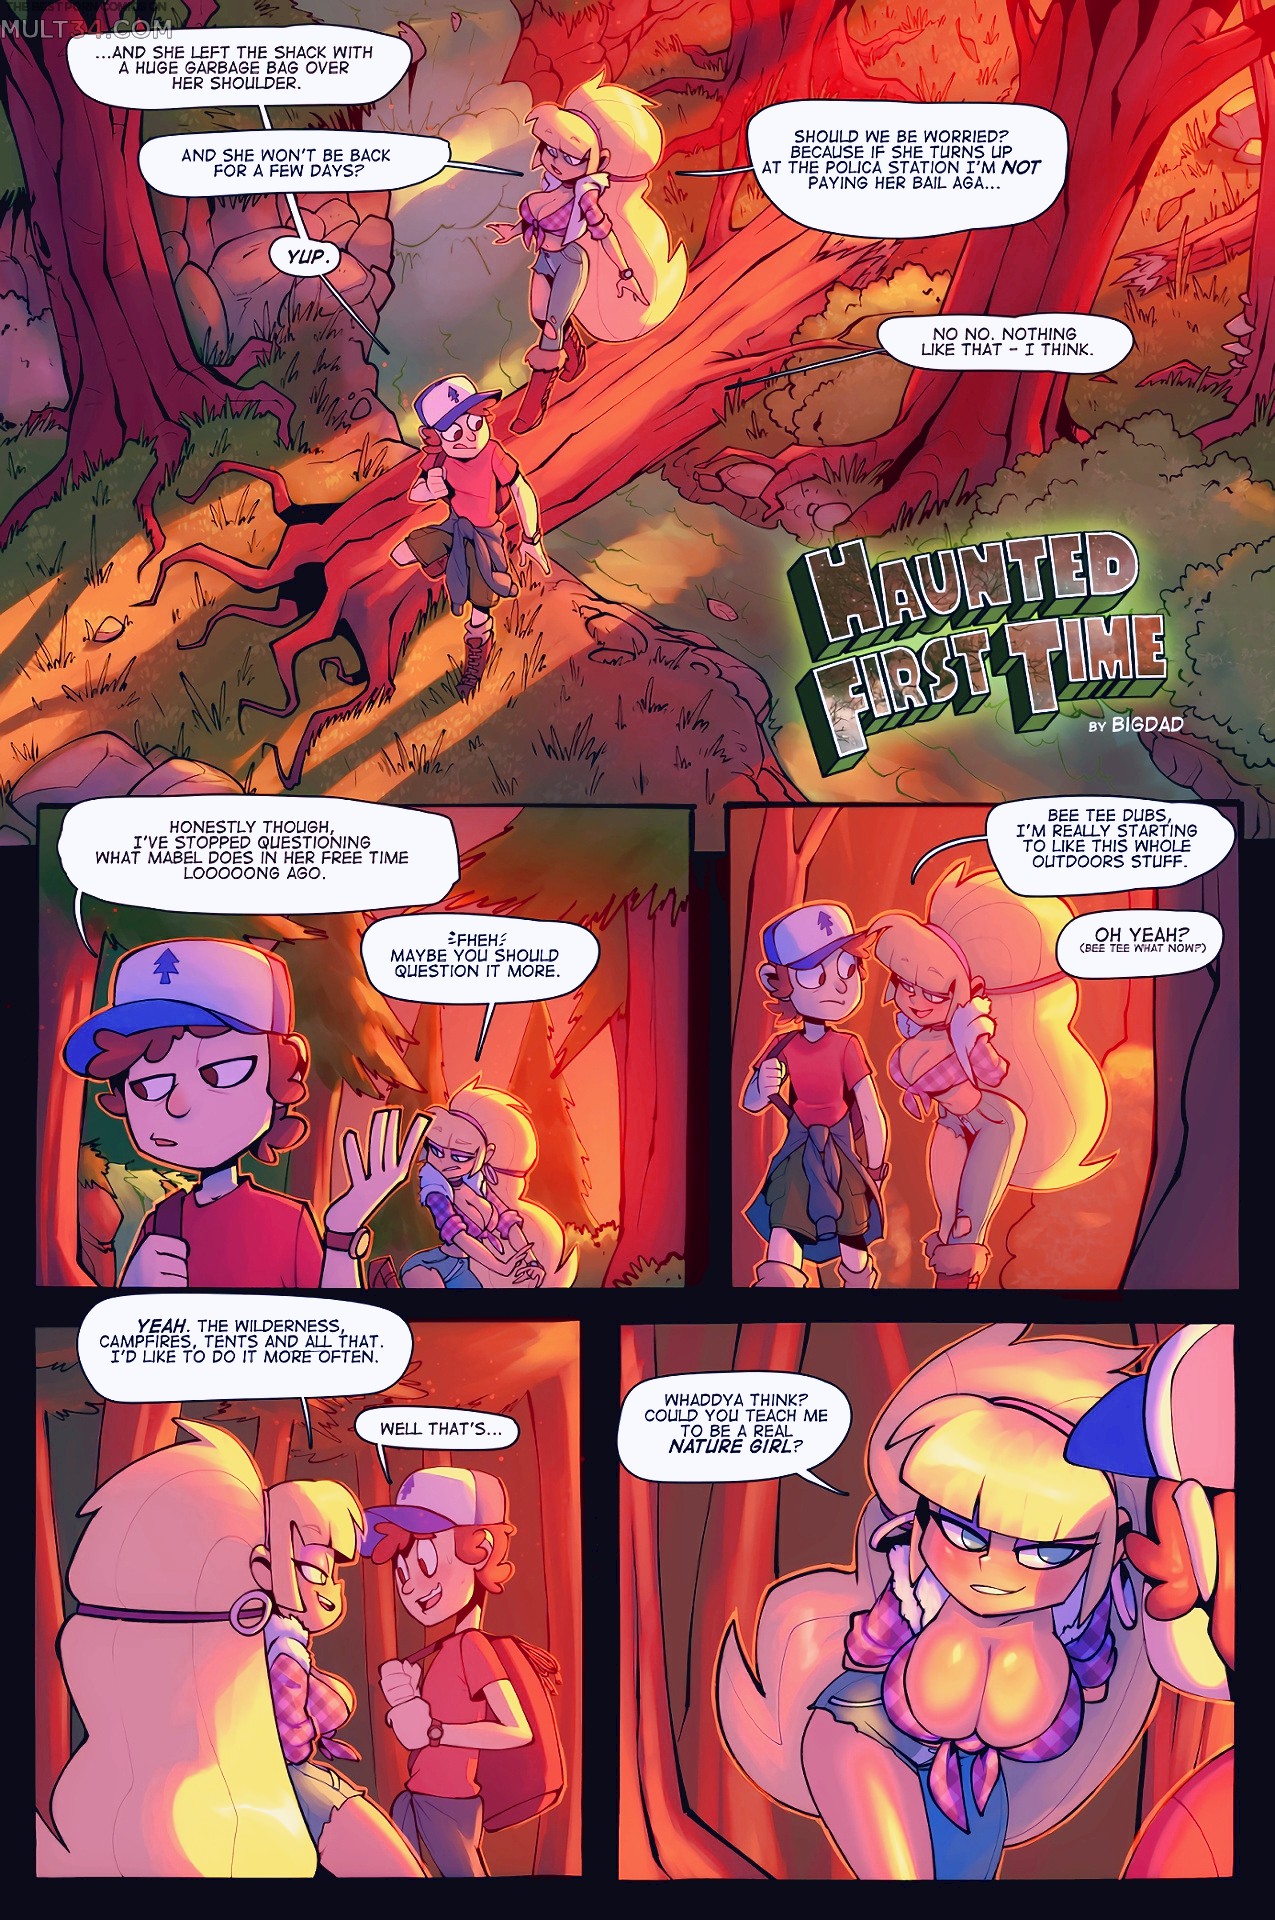 Cartoon Porn Gravity Falls Dipper And Pacifica - Haunted First Time porn comic - the best cartoon porn comics, Rule 34 |  MULT34